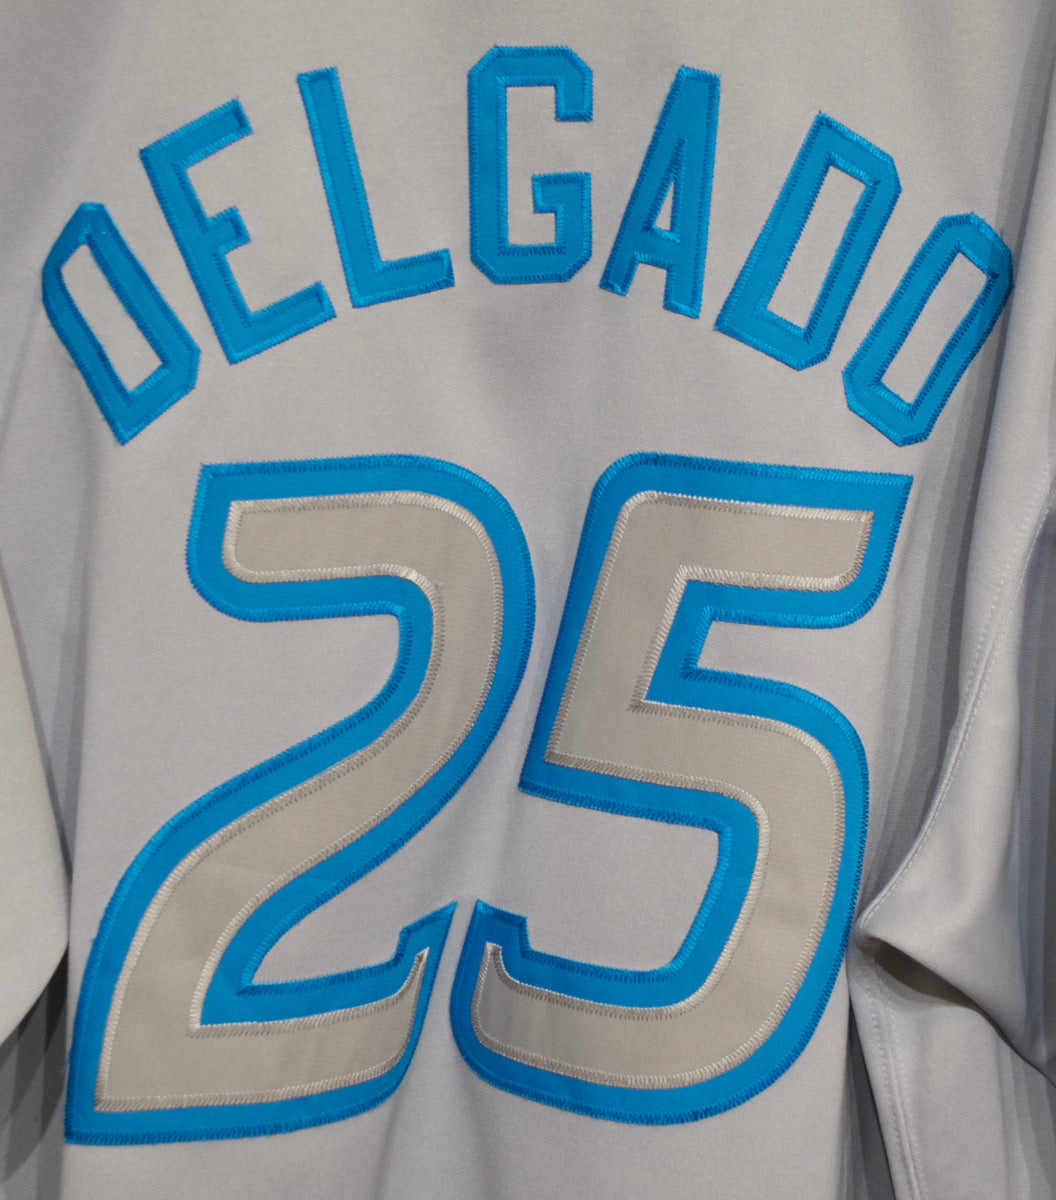 Blue Jays Delgado Pullover Jersey size 2X – Mr. Throwback NYC